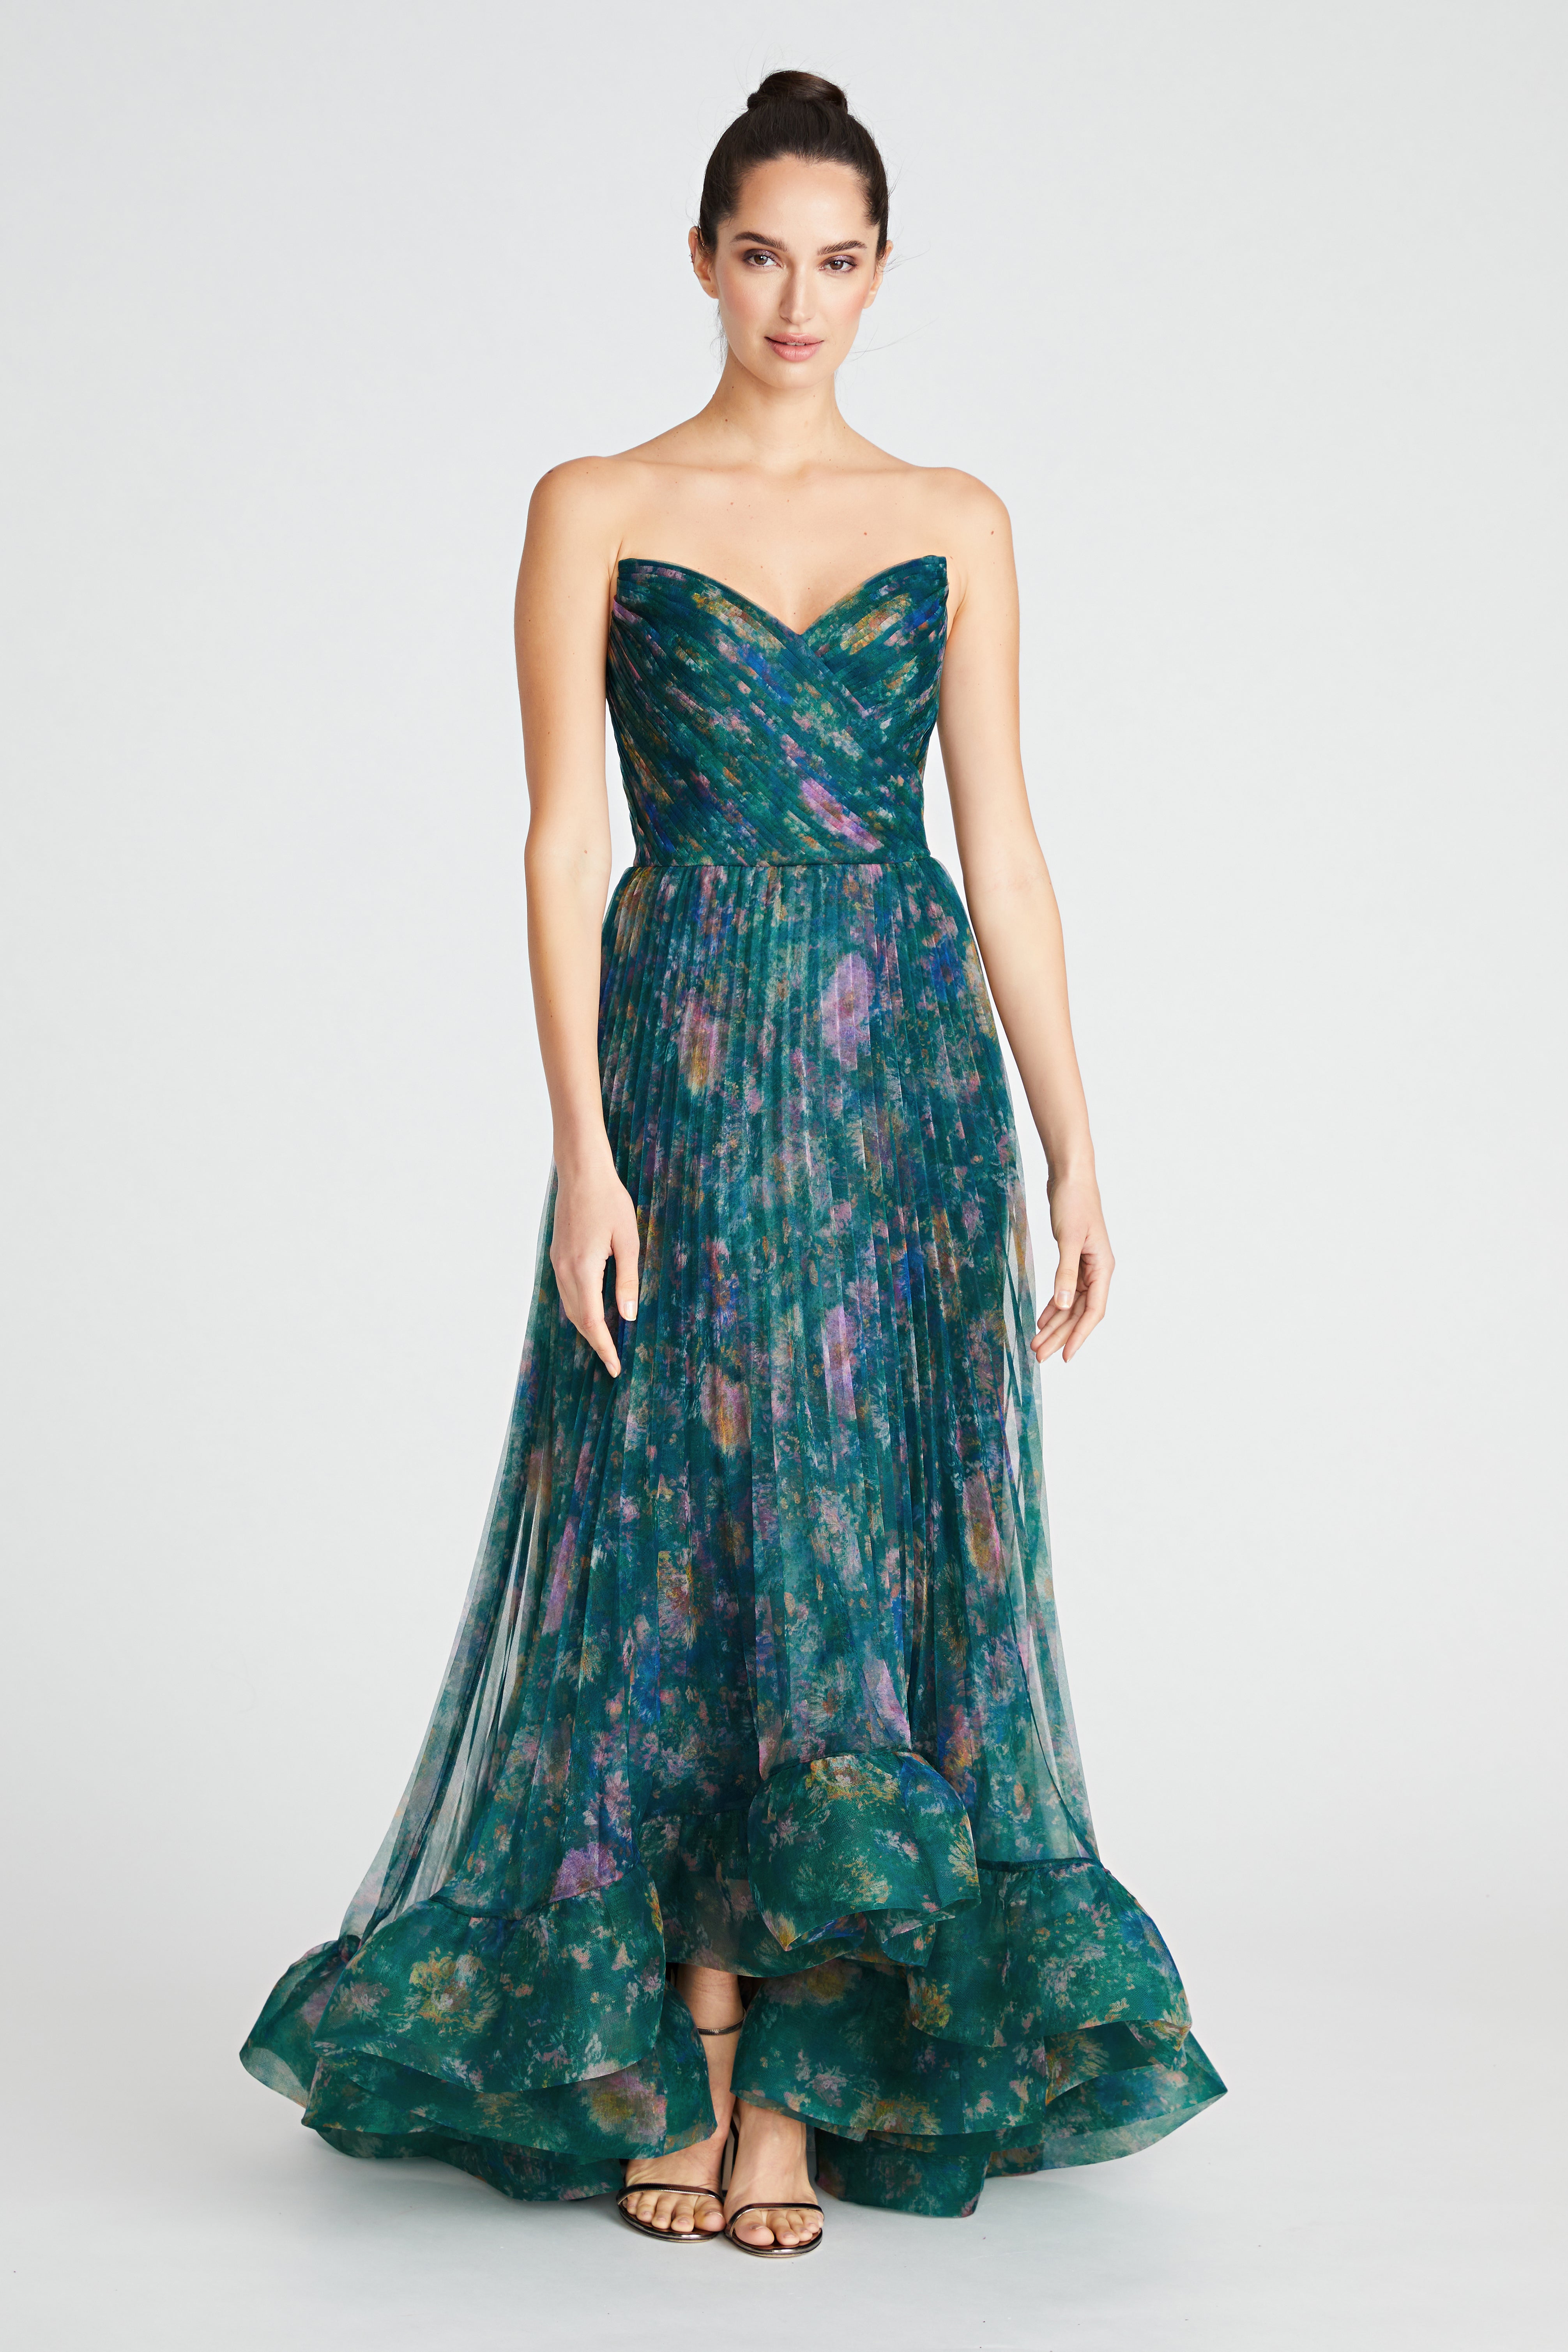 Moira Strapless High Low Gown